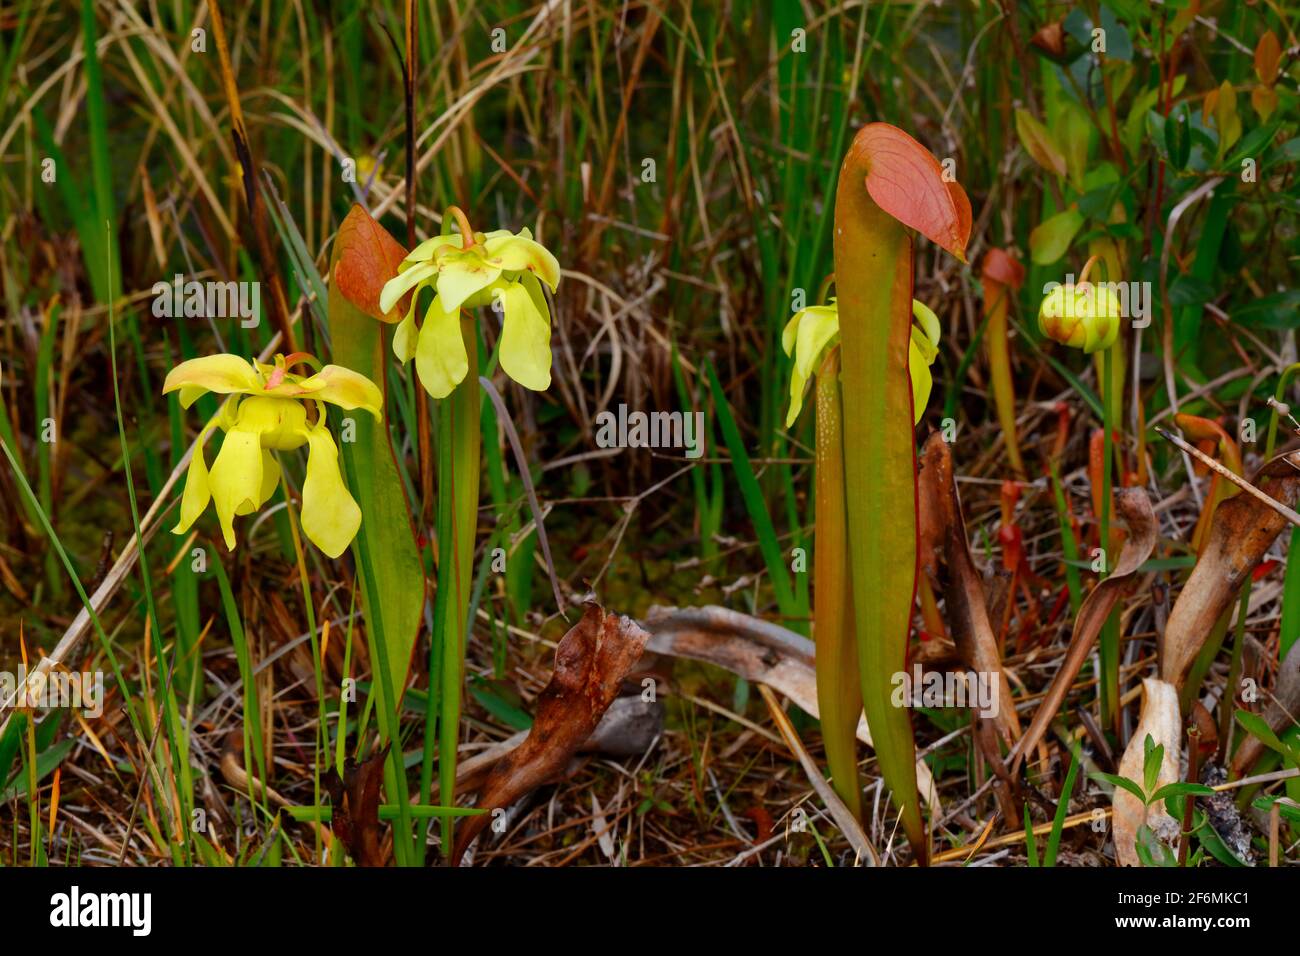 Pitcher plants and its flowers are living on the edge of a swamp. Stock Photo